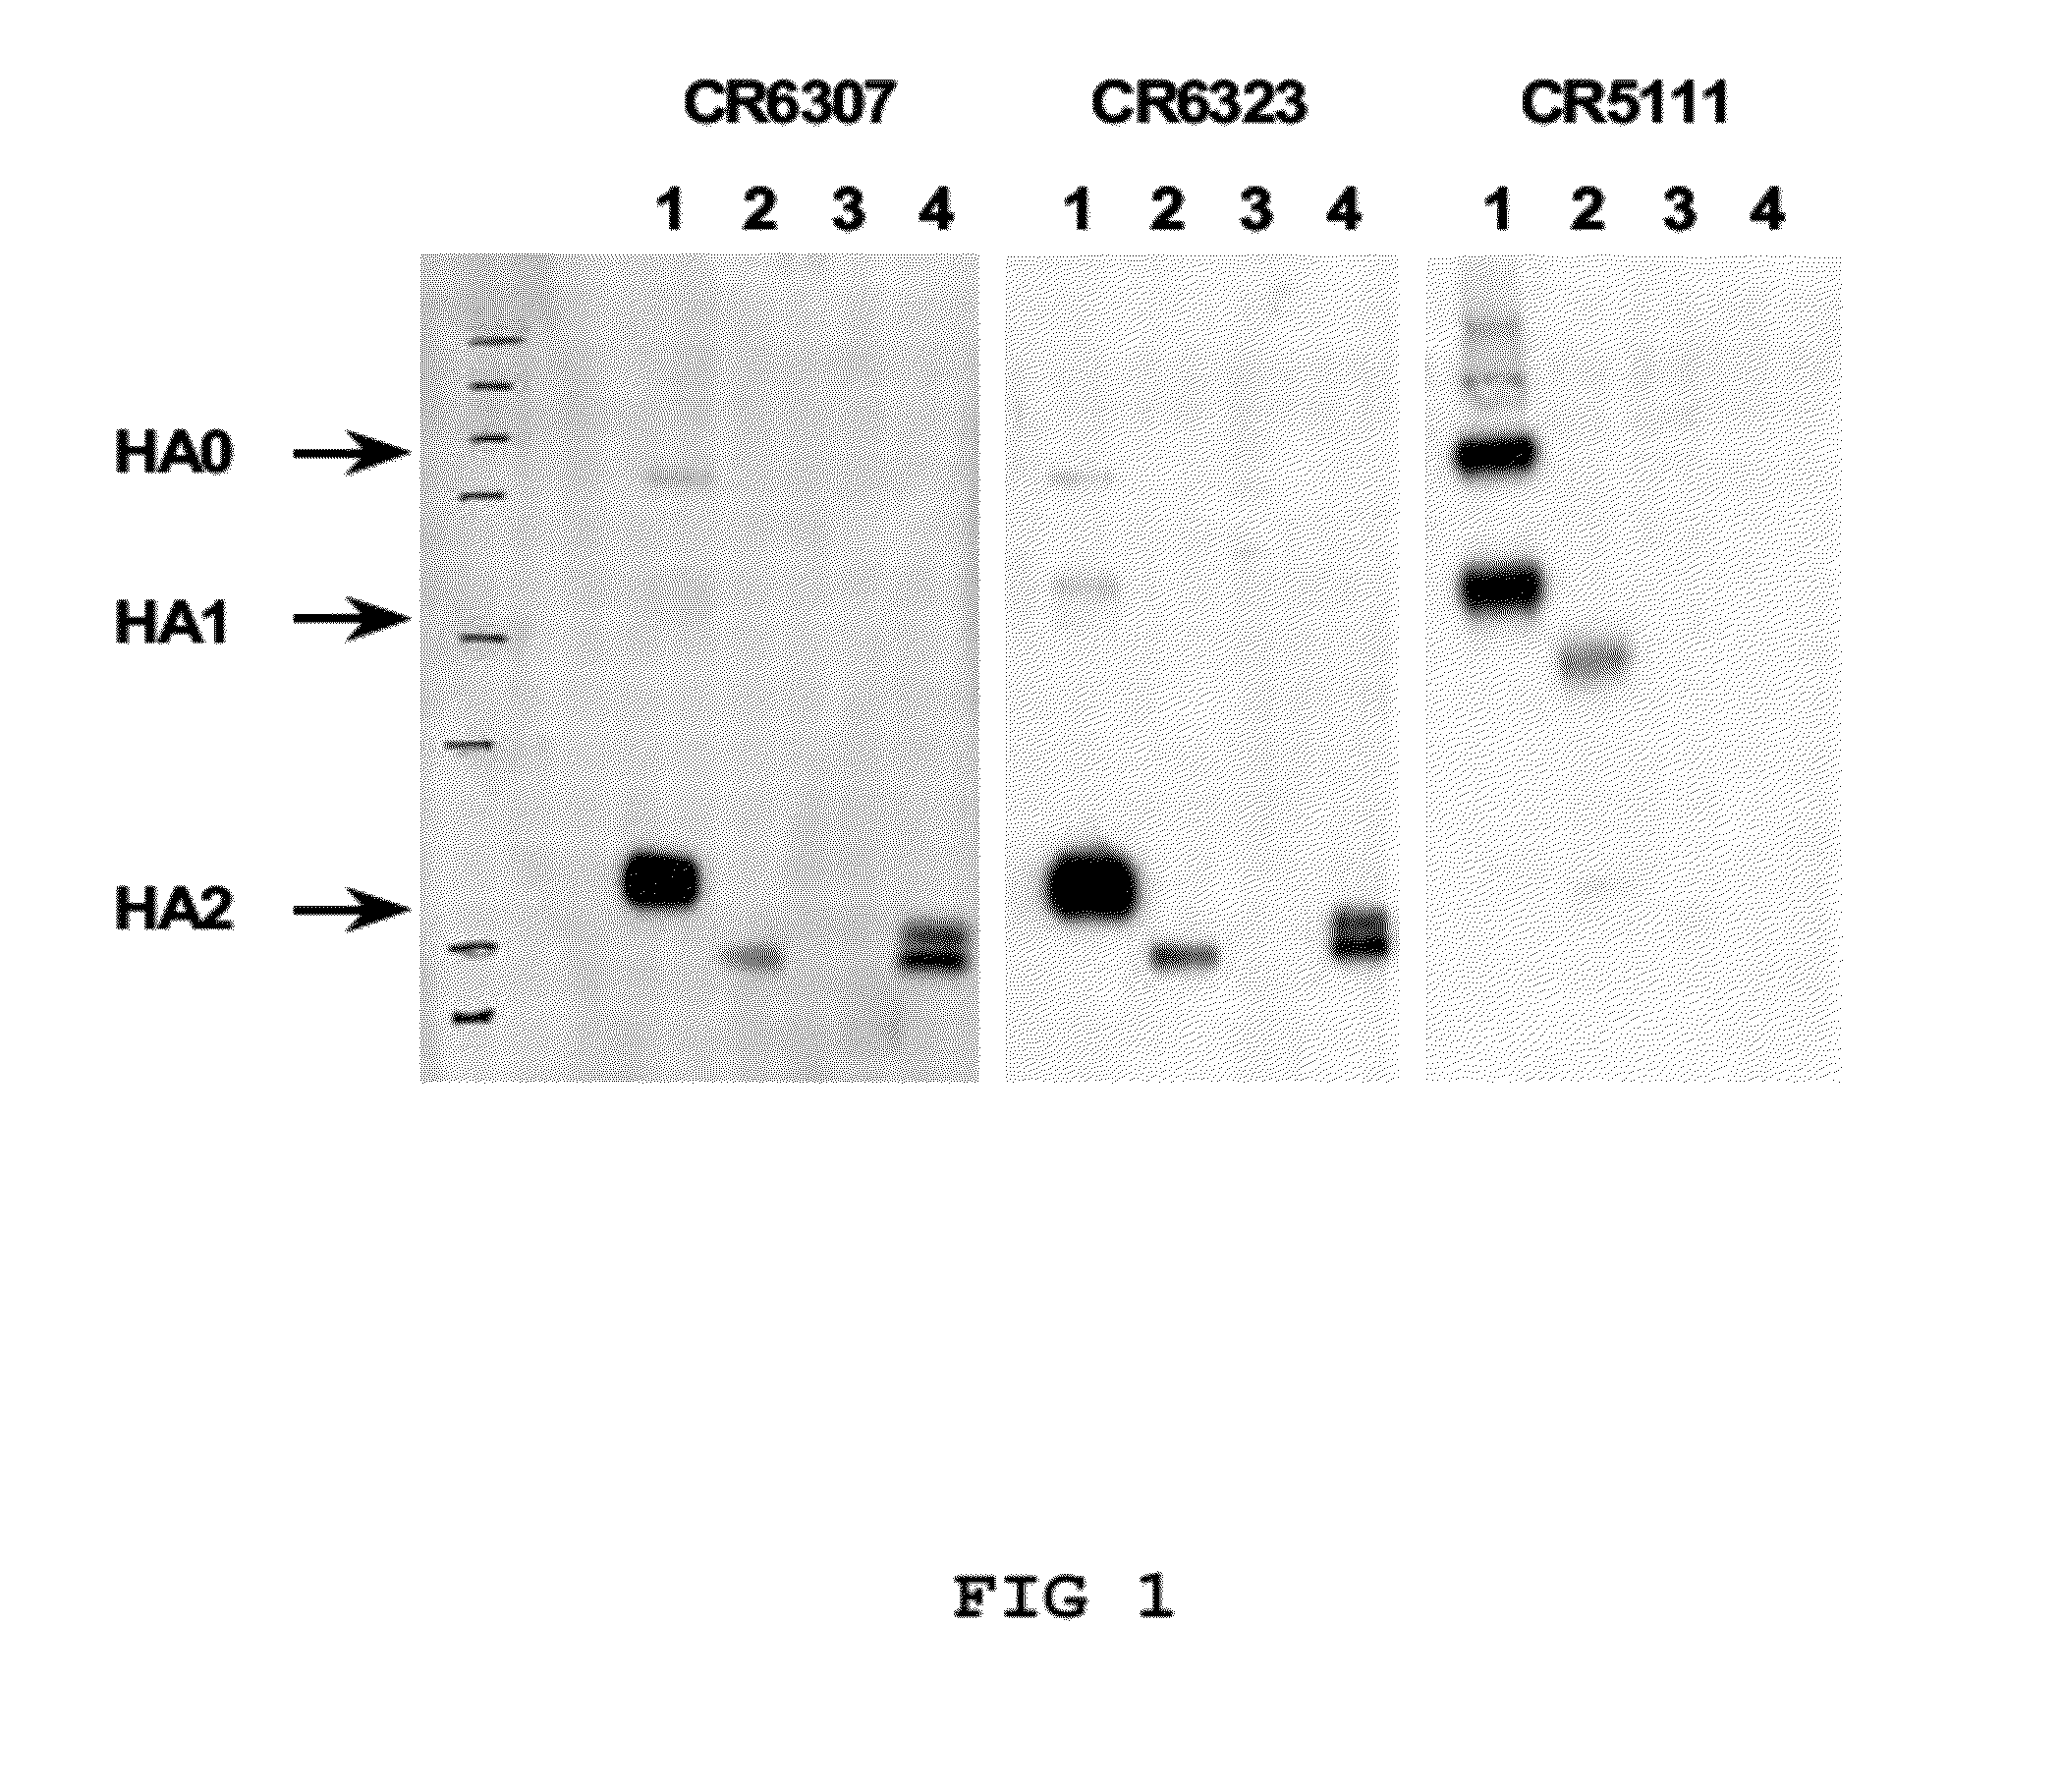 Human binding molecules capable of neutralizing influenza virus h5n1 and uses thereof